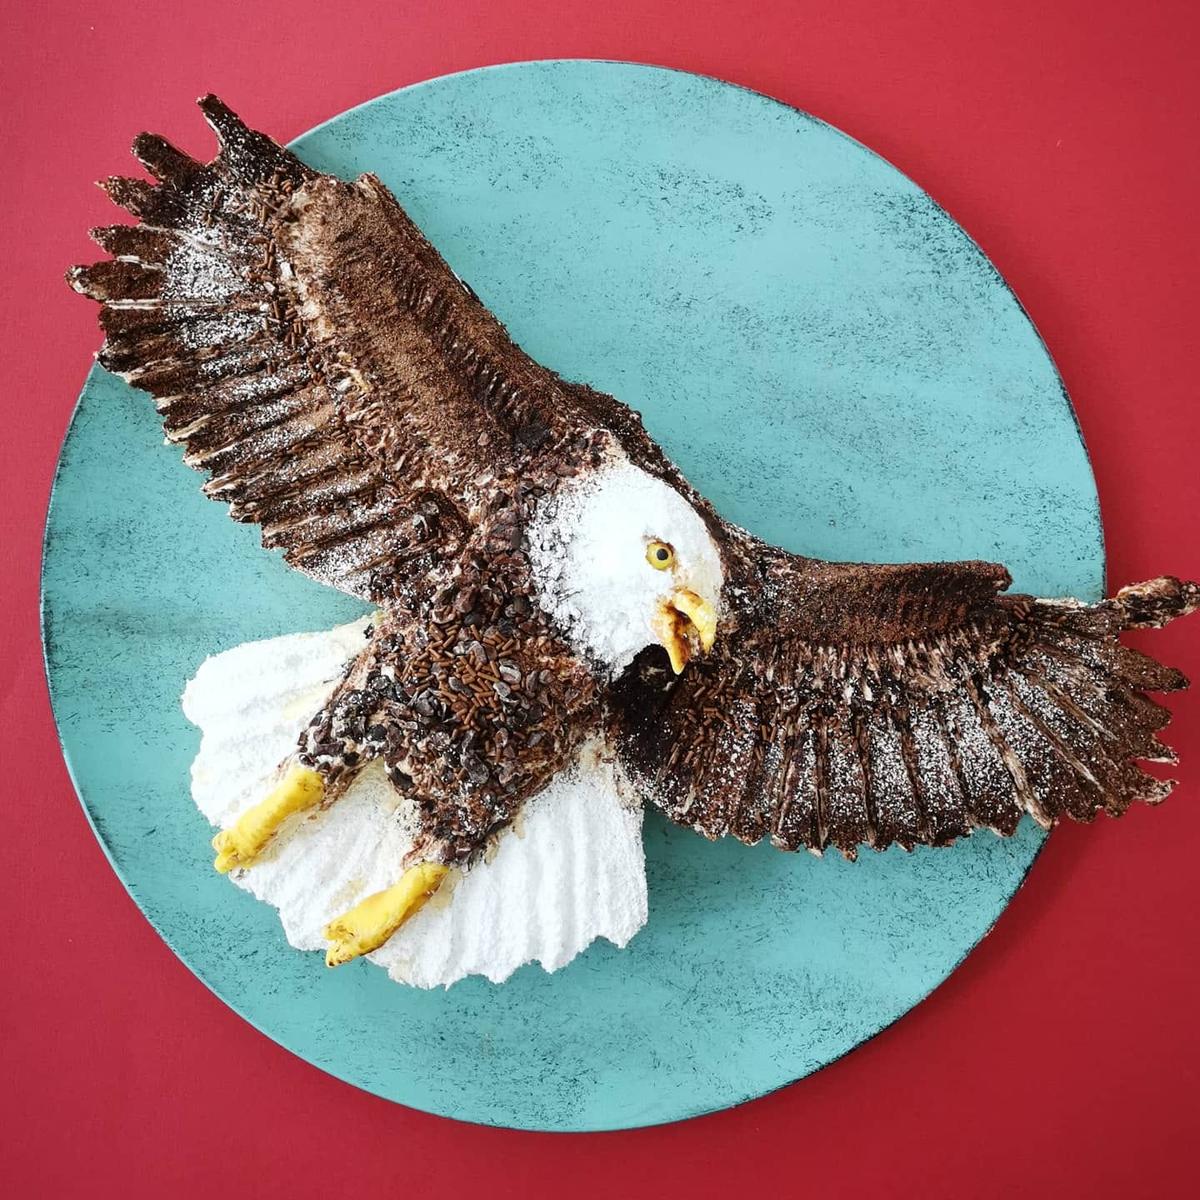 "Sweet Eagle Dessert": A fluffy biscuit pie made with vanilla butter cream, Nutella, cacao powder, and chocolate chunks. (Courtesy of <a href="https://www.instagram.com/demealprepper/">Jolanda Stokkermans</a>)